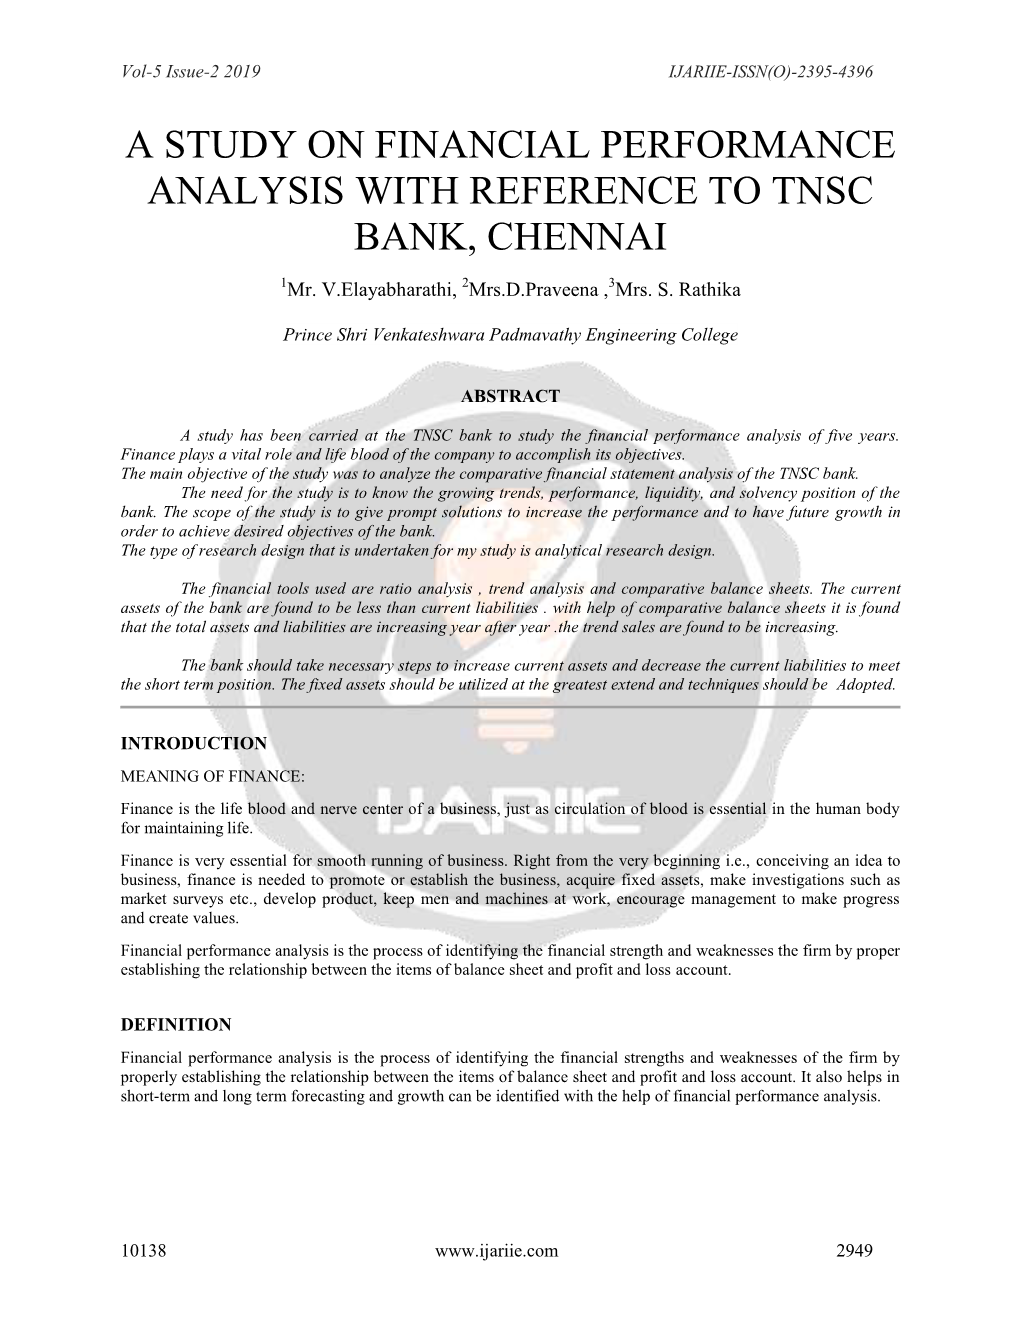 A Study on Financial Performance Analysis with Reference to Tnsc Bank, Chennai